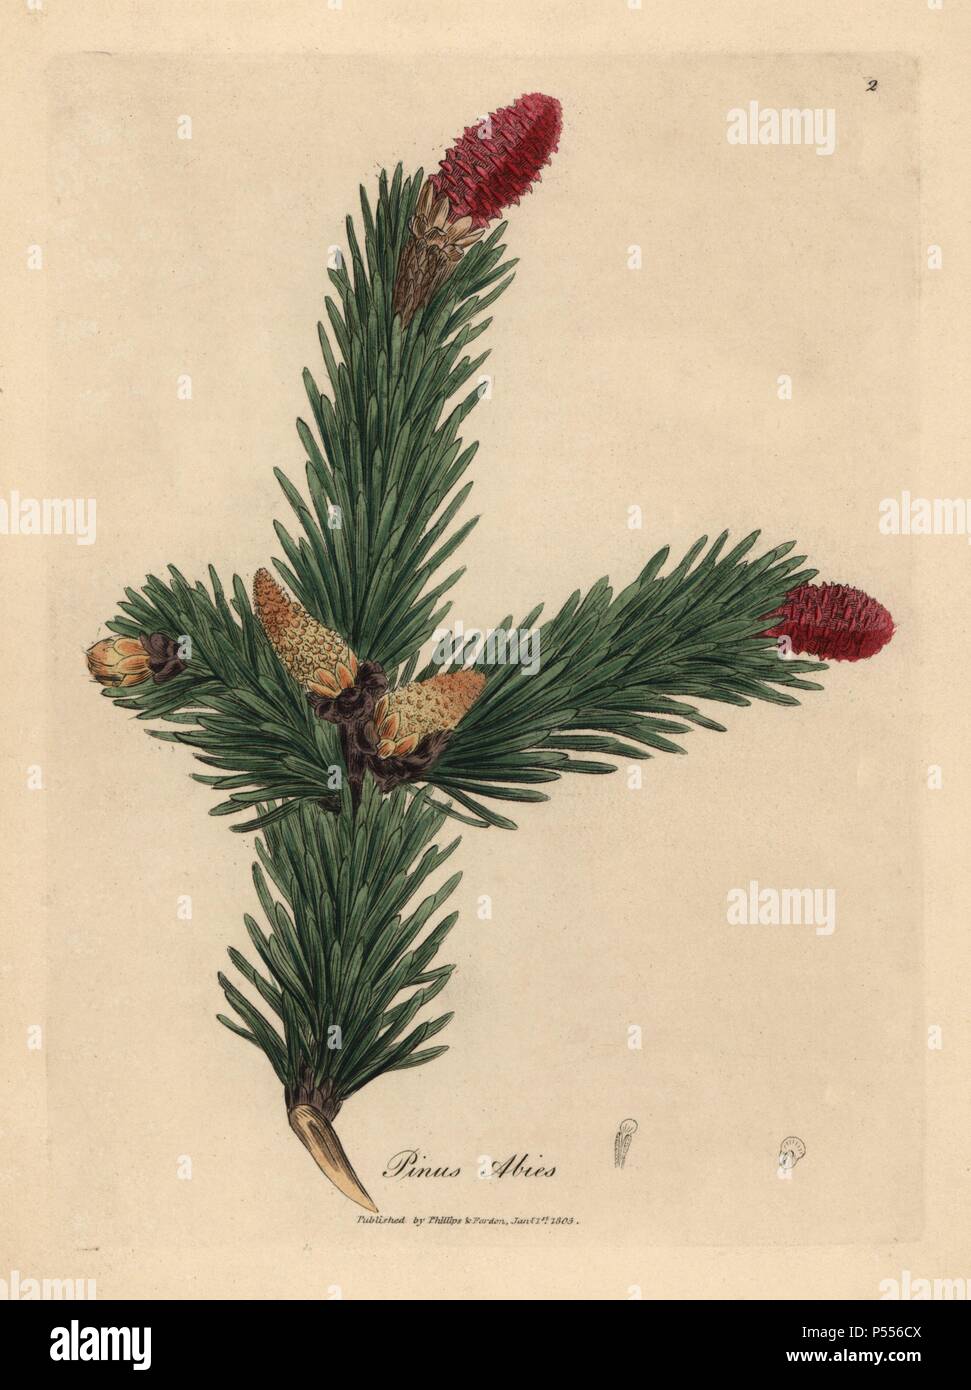 Norway spruce, Pinus abies. Handcolored copperplate engraving from a botanical illustration by James Sowerby from William Woodville and Sir William Jackson Hooker's 'Medical Botany,' John Bohn, London, 1832. The tireless Sowerby (1757-1822) drew over 2, 500 plants for Smith's mammoth 'English Botany' (1790-1814) and 440 mushrooms for 'Coloured Figures of English Fungi ' (1797) among many other works. Stock Photo